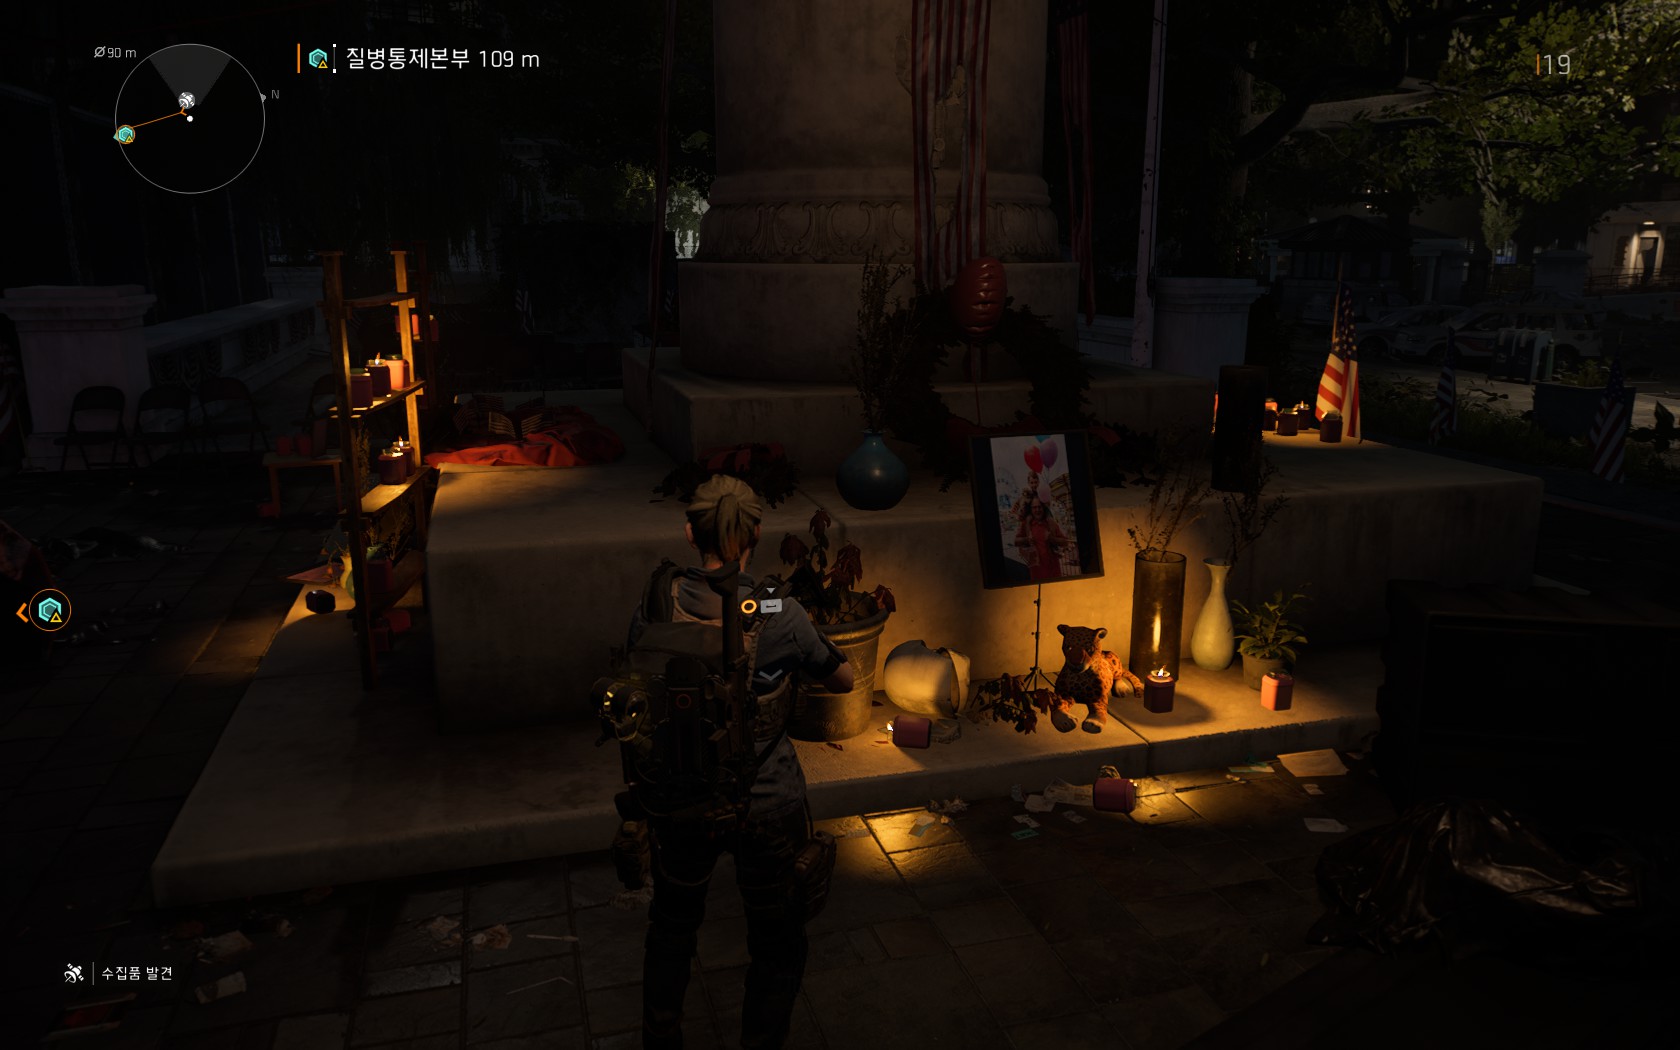 Tom Clancy',s The Division® 22019-10-19-21-10-44.jpg